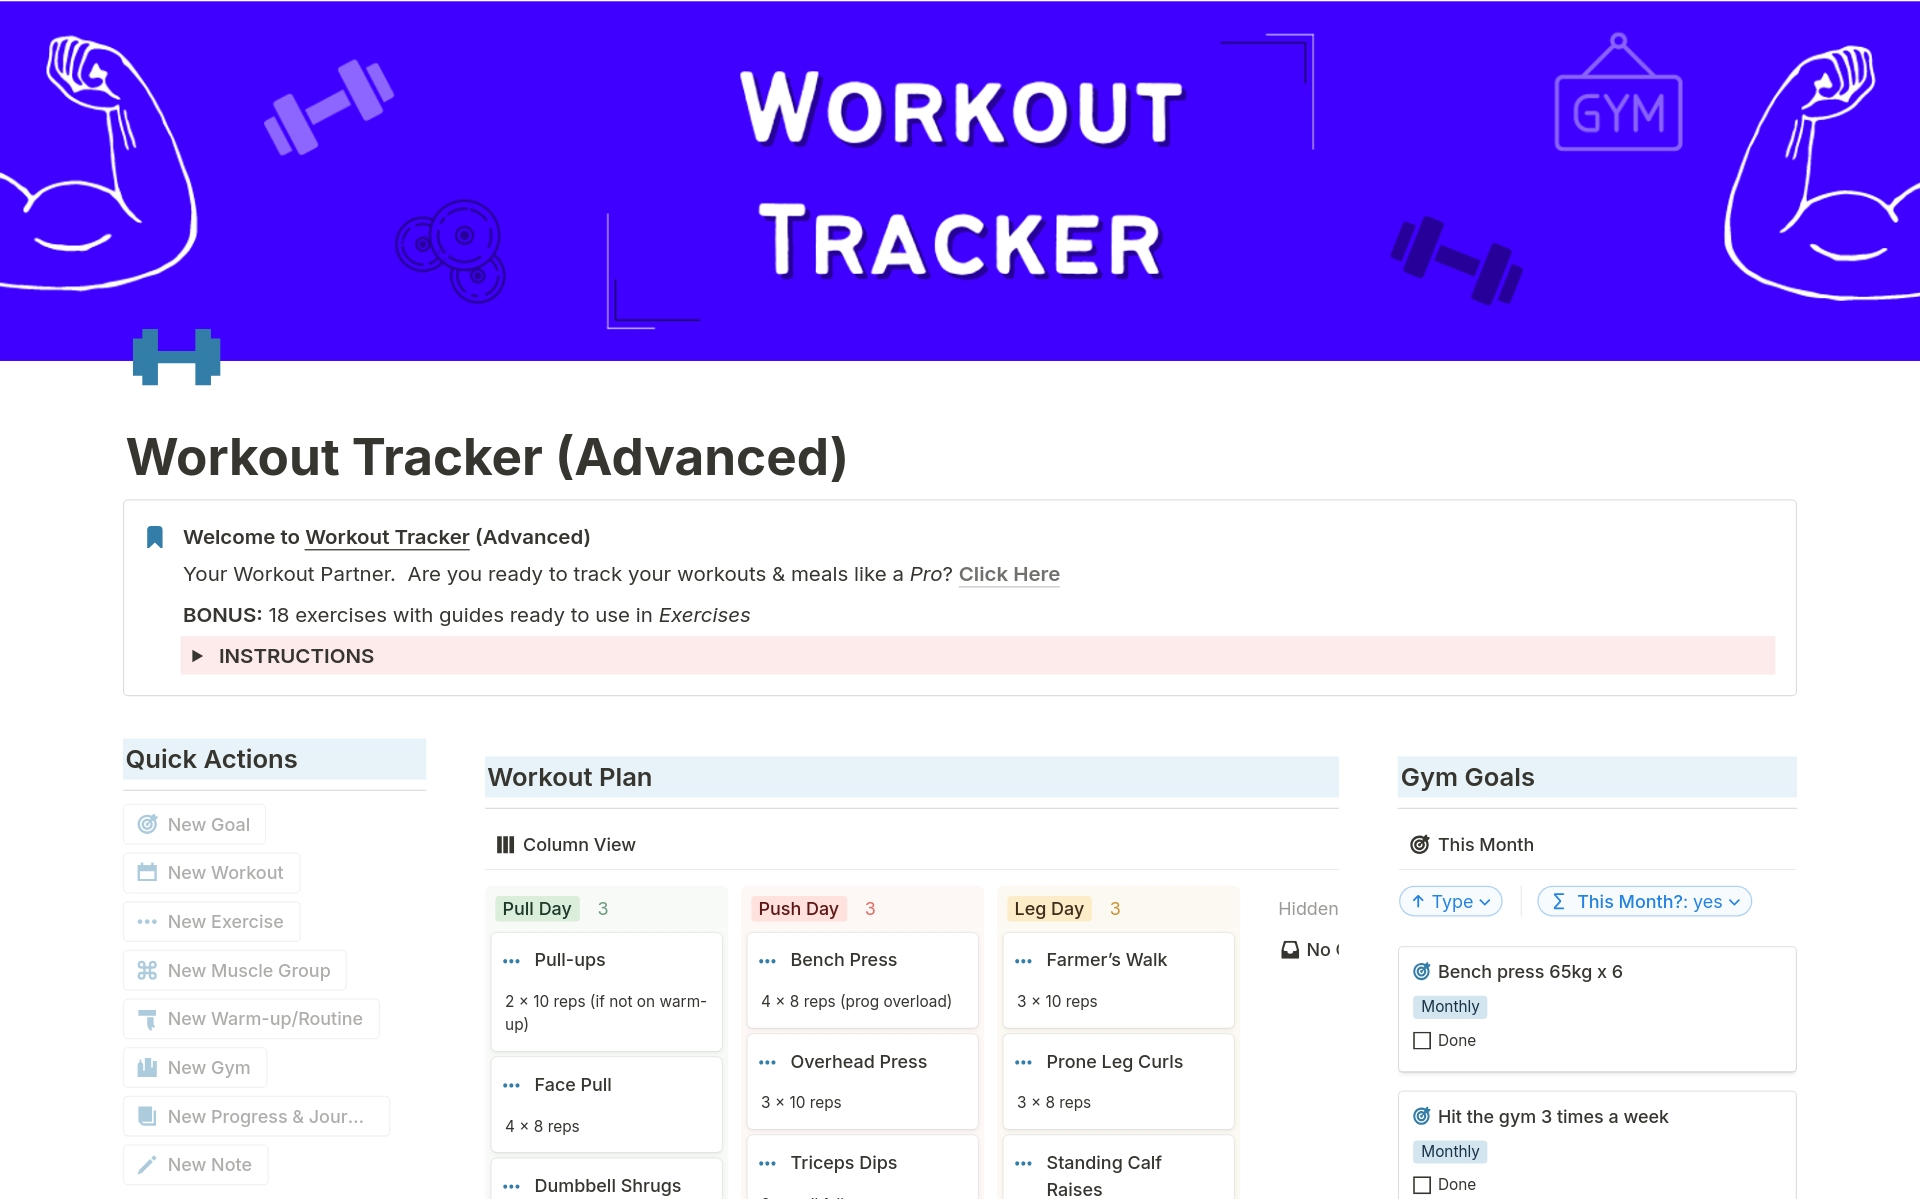 Your Workout Partner.
Do you want to start your gym journey, but don't know how?
Maybe you're already going to the gym and you want to track your progress & sessions?
Track your workout sessions, schedule them & have everything in one place.
FREE Version inside :)